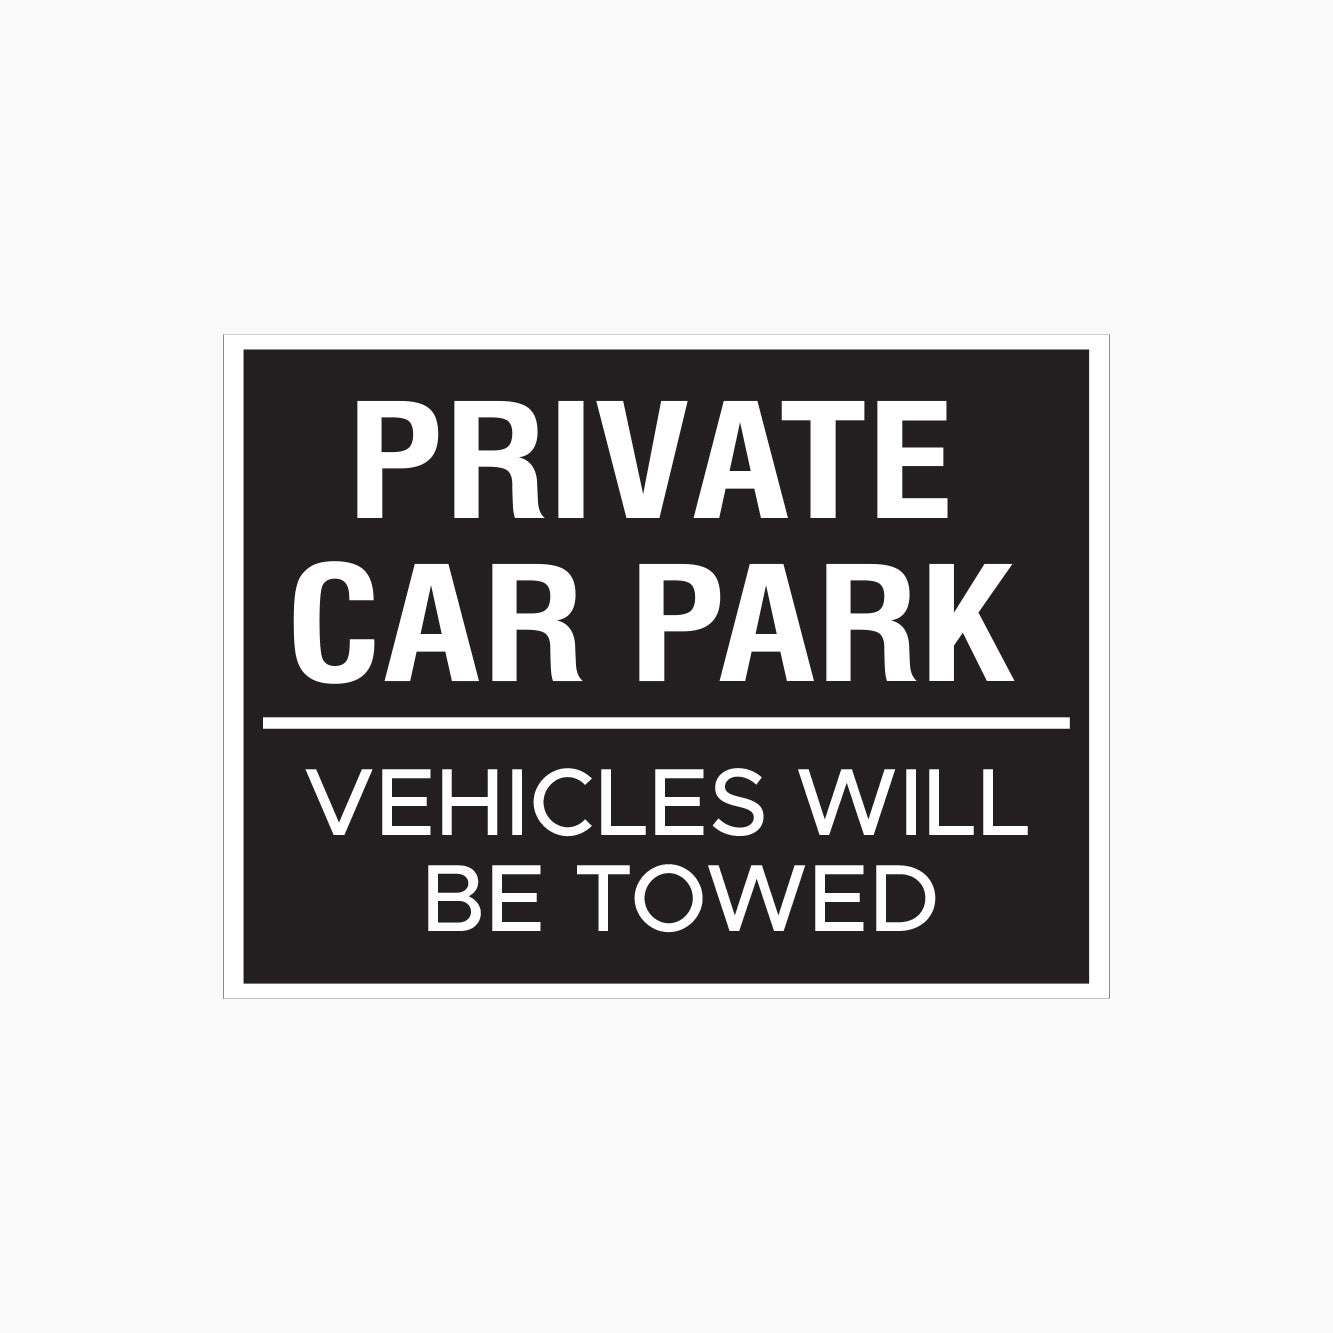 PRIVATE CAR PARK - VEHICLES WILL BE TOWED SIGN - PARKING AND NO PARKING SIGNS IN AUSTRALIA